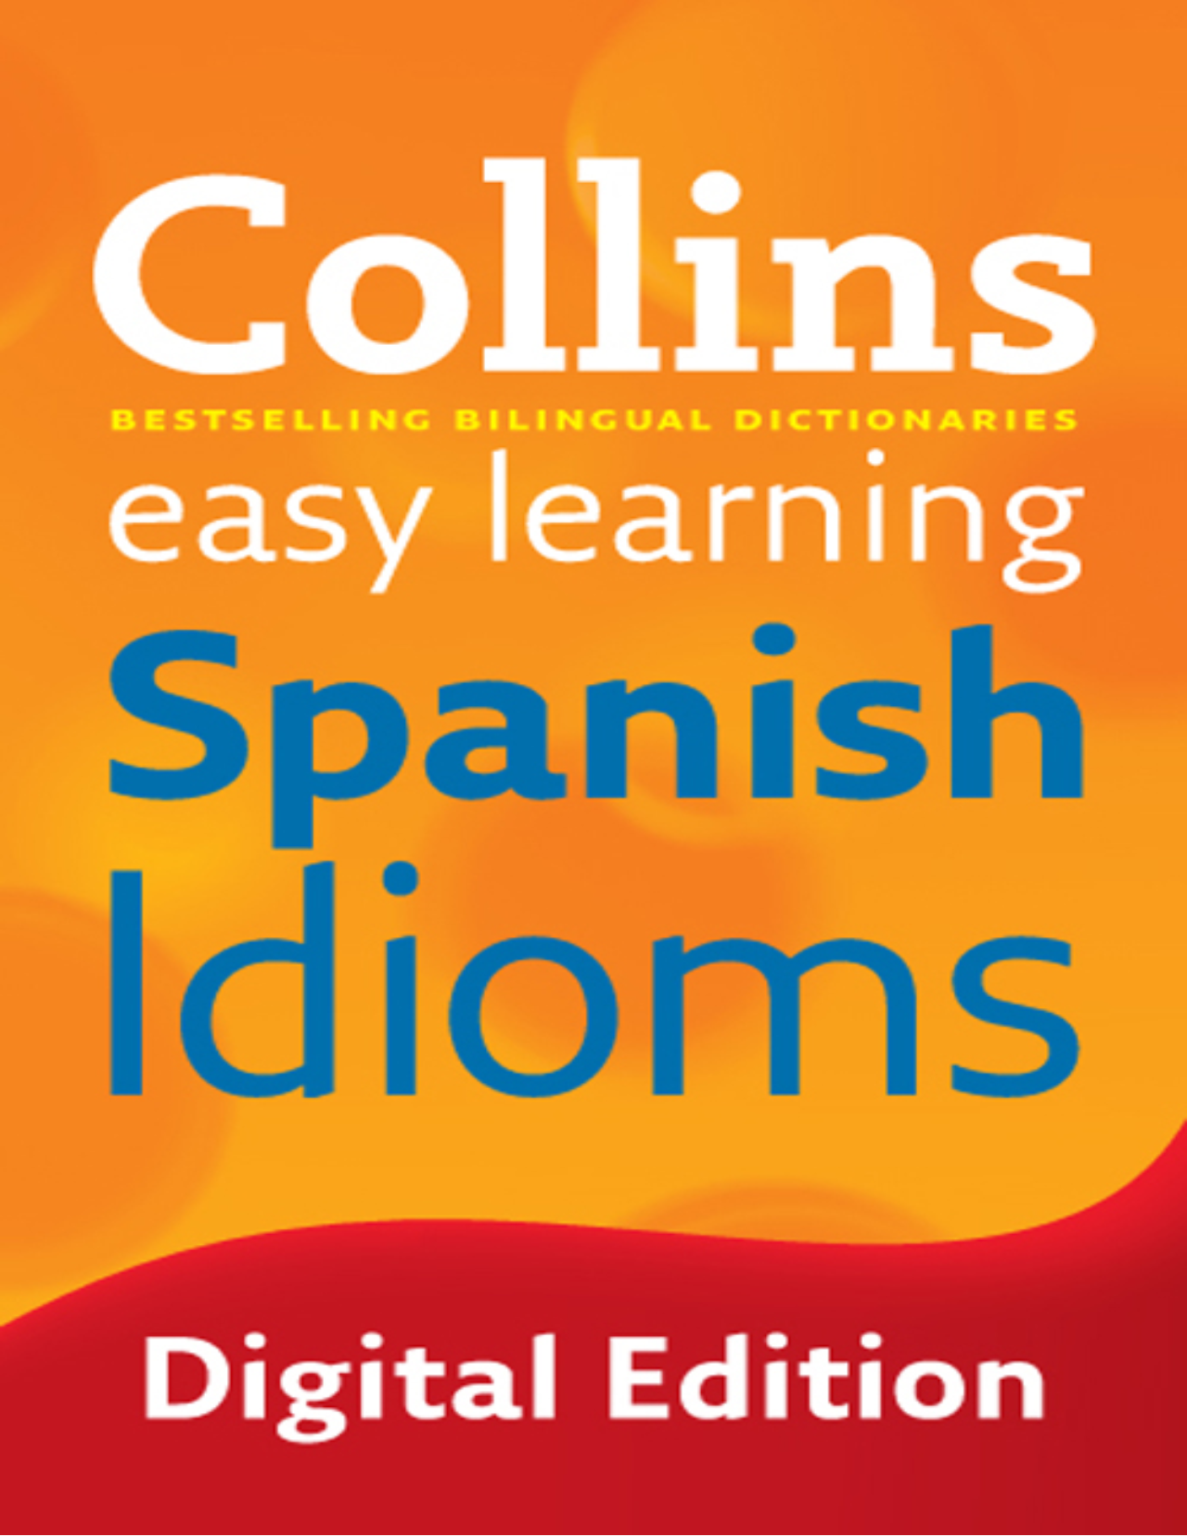 Rich results on Google's SERP when searching for ''Collins-Easy-Learning-Spanish-Idioms-Book''